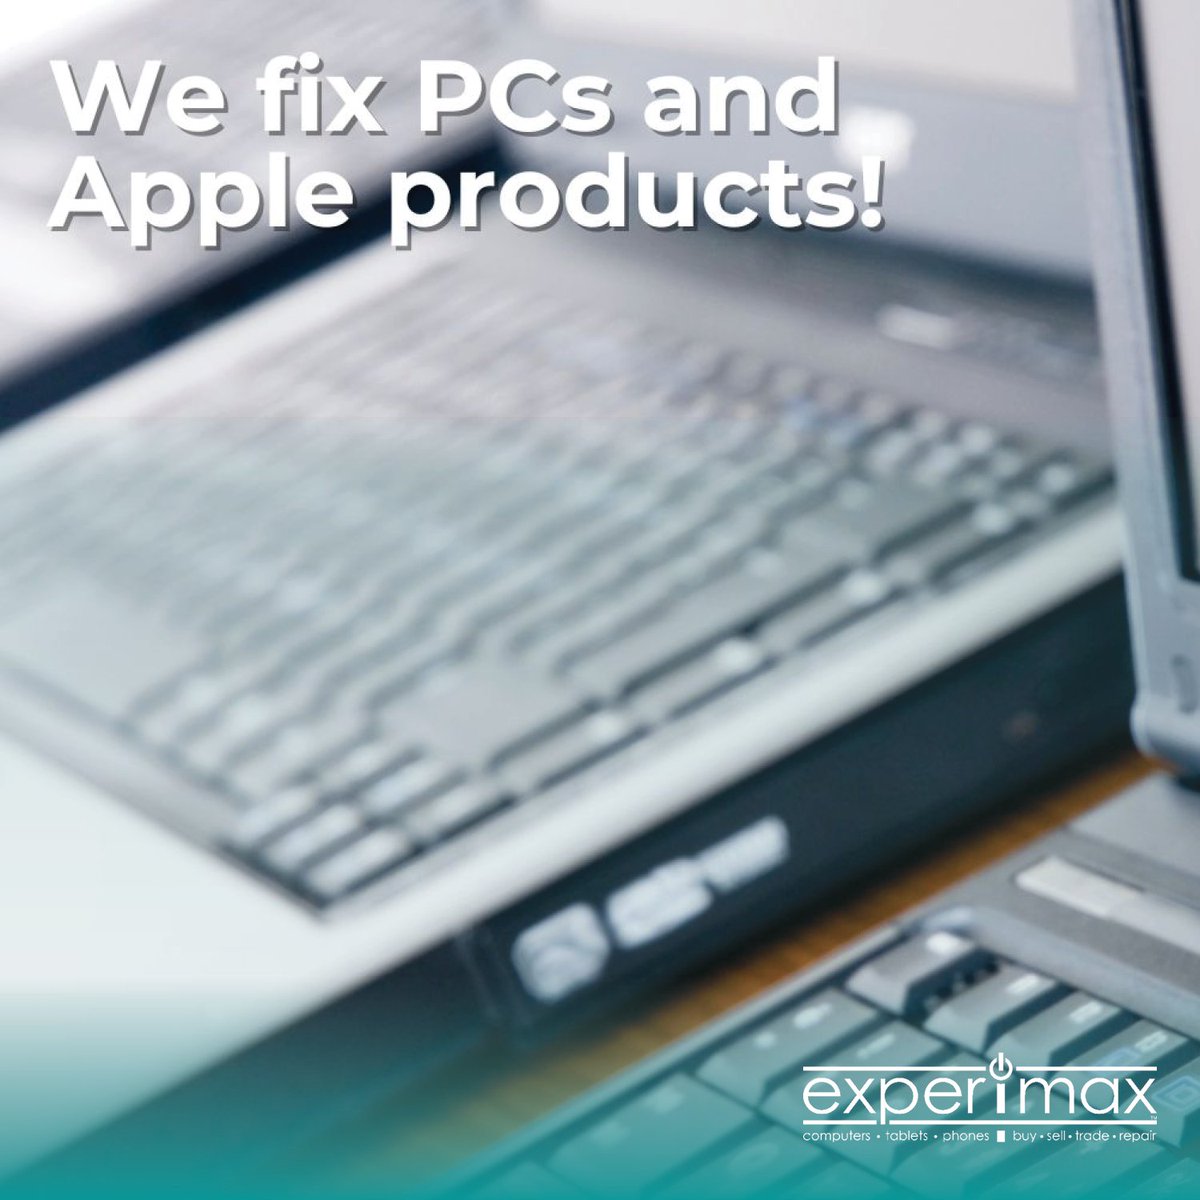 We don't just repair Apple products - our X-perts can fix your PCs and Androids too! Come by today for help with your tech. #PCs #Android #Experimax